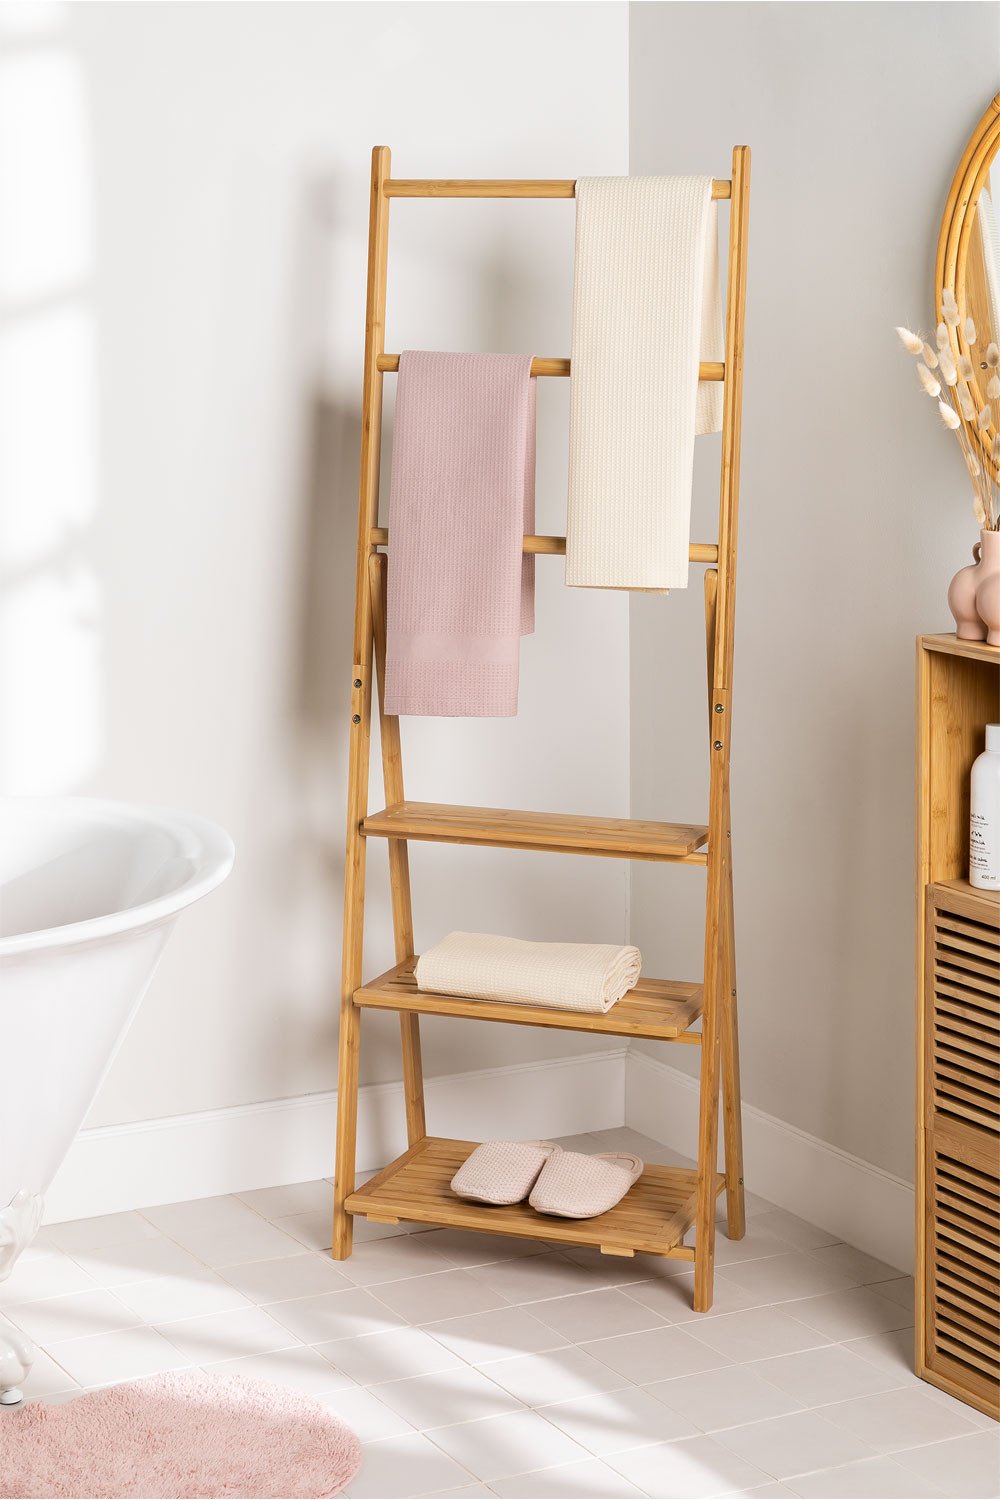 Floor Towel Rack with Bamboo Shelves Laos, gallery image 1